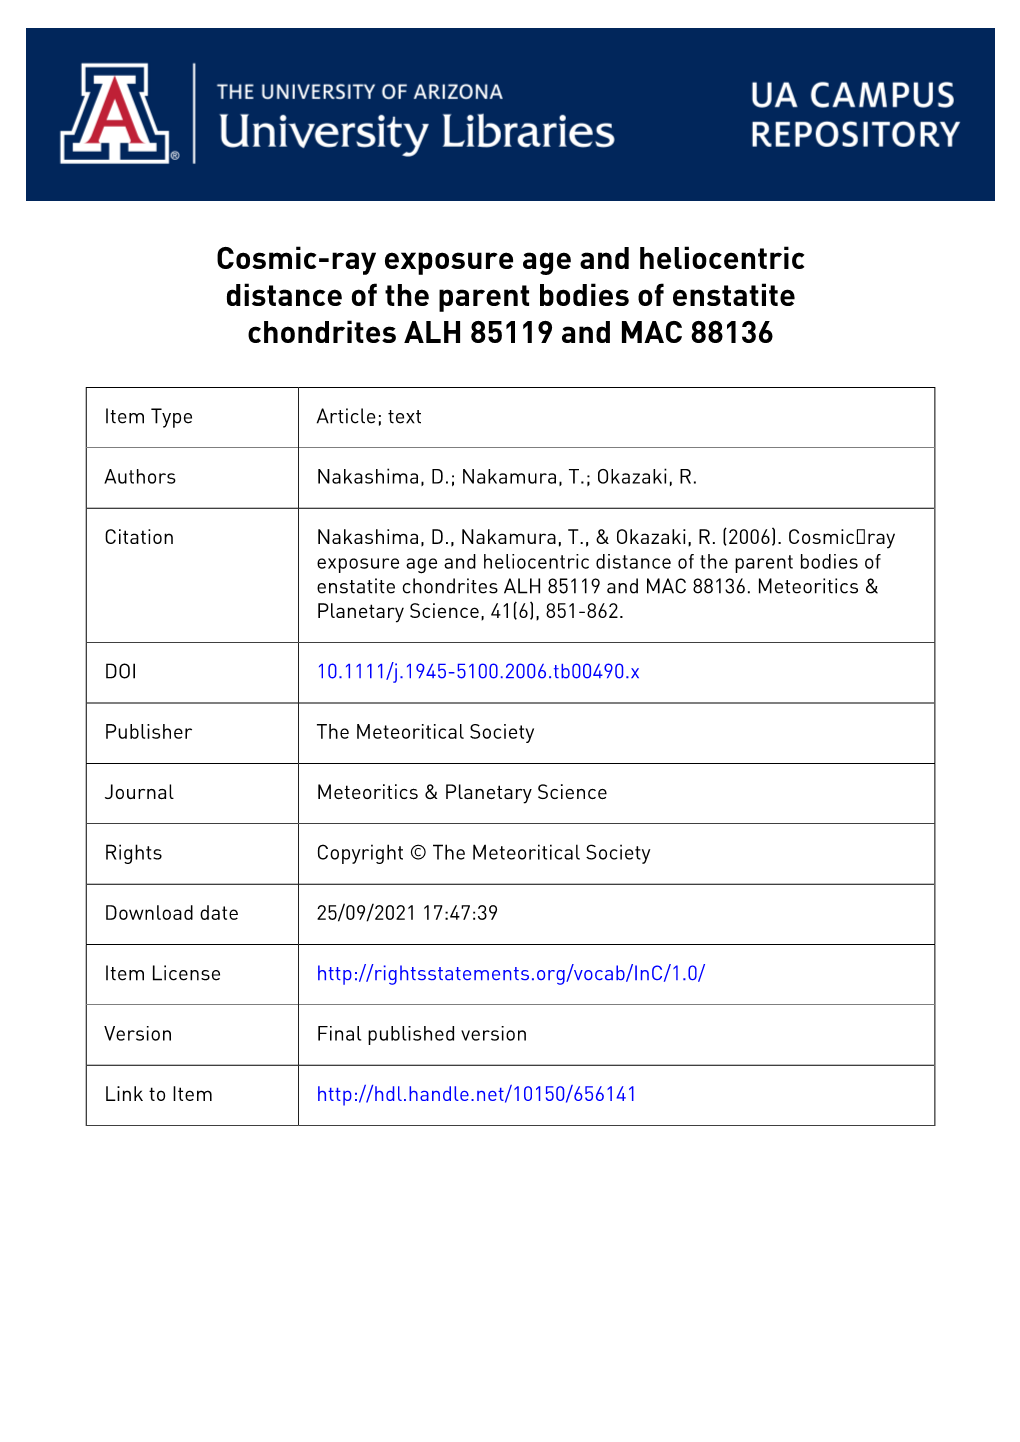 Cosmic-Ray Exposure Age and Heliocentric Distance of the Parent Bodies of Enstatite Chondrites ALH 85119 and MAC 88136